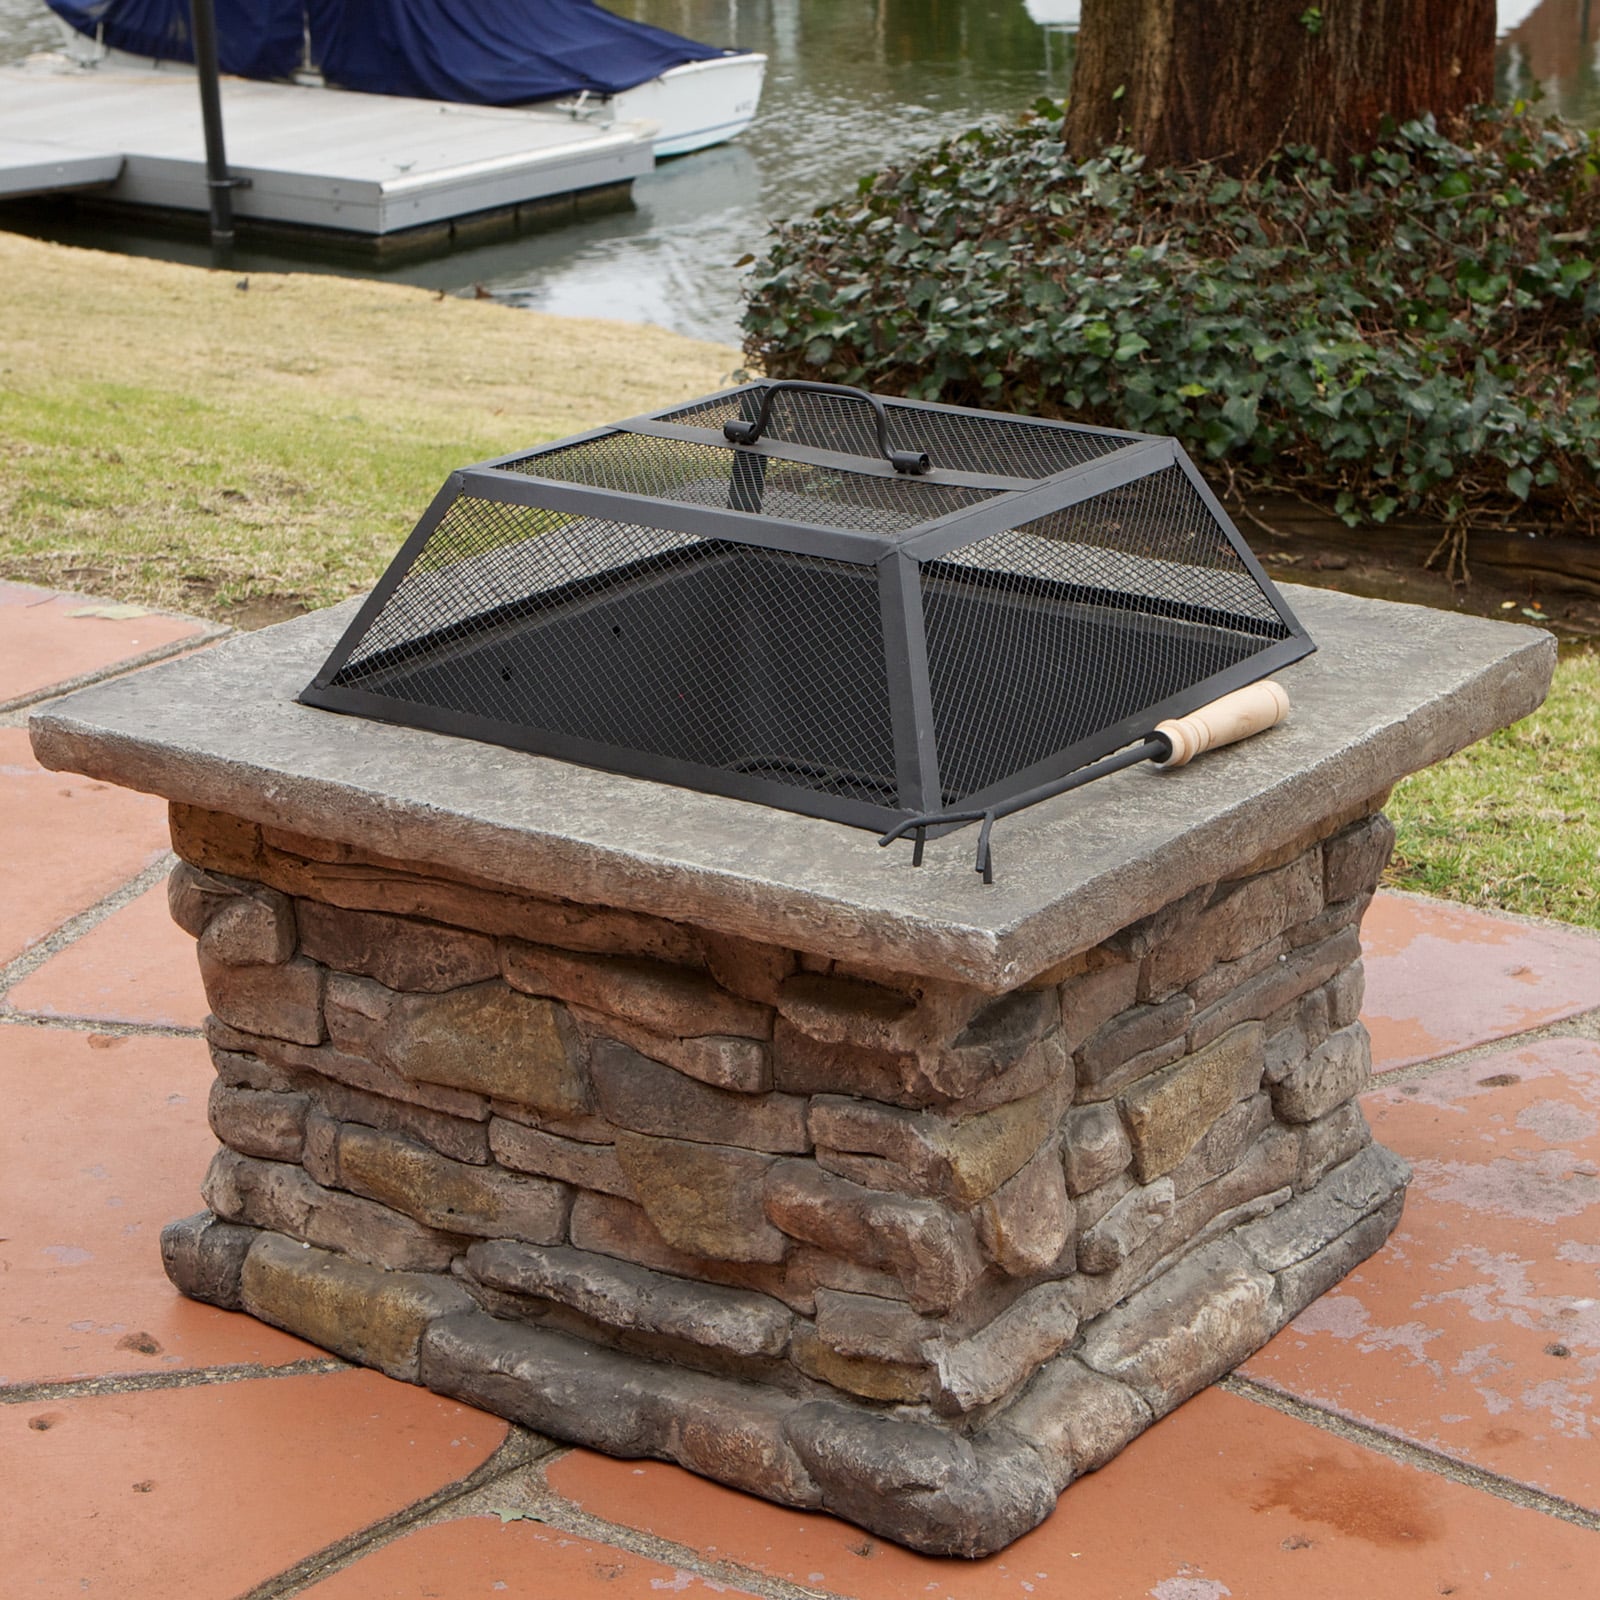 Best Selling Home Decor Corporal Square Wood Burning Fire Pit